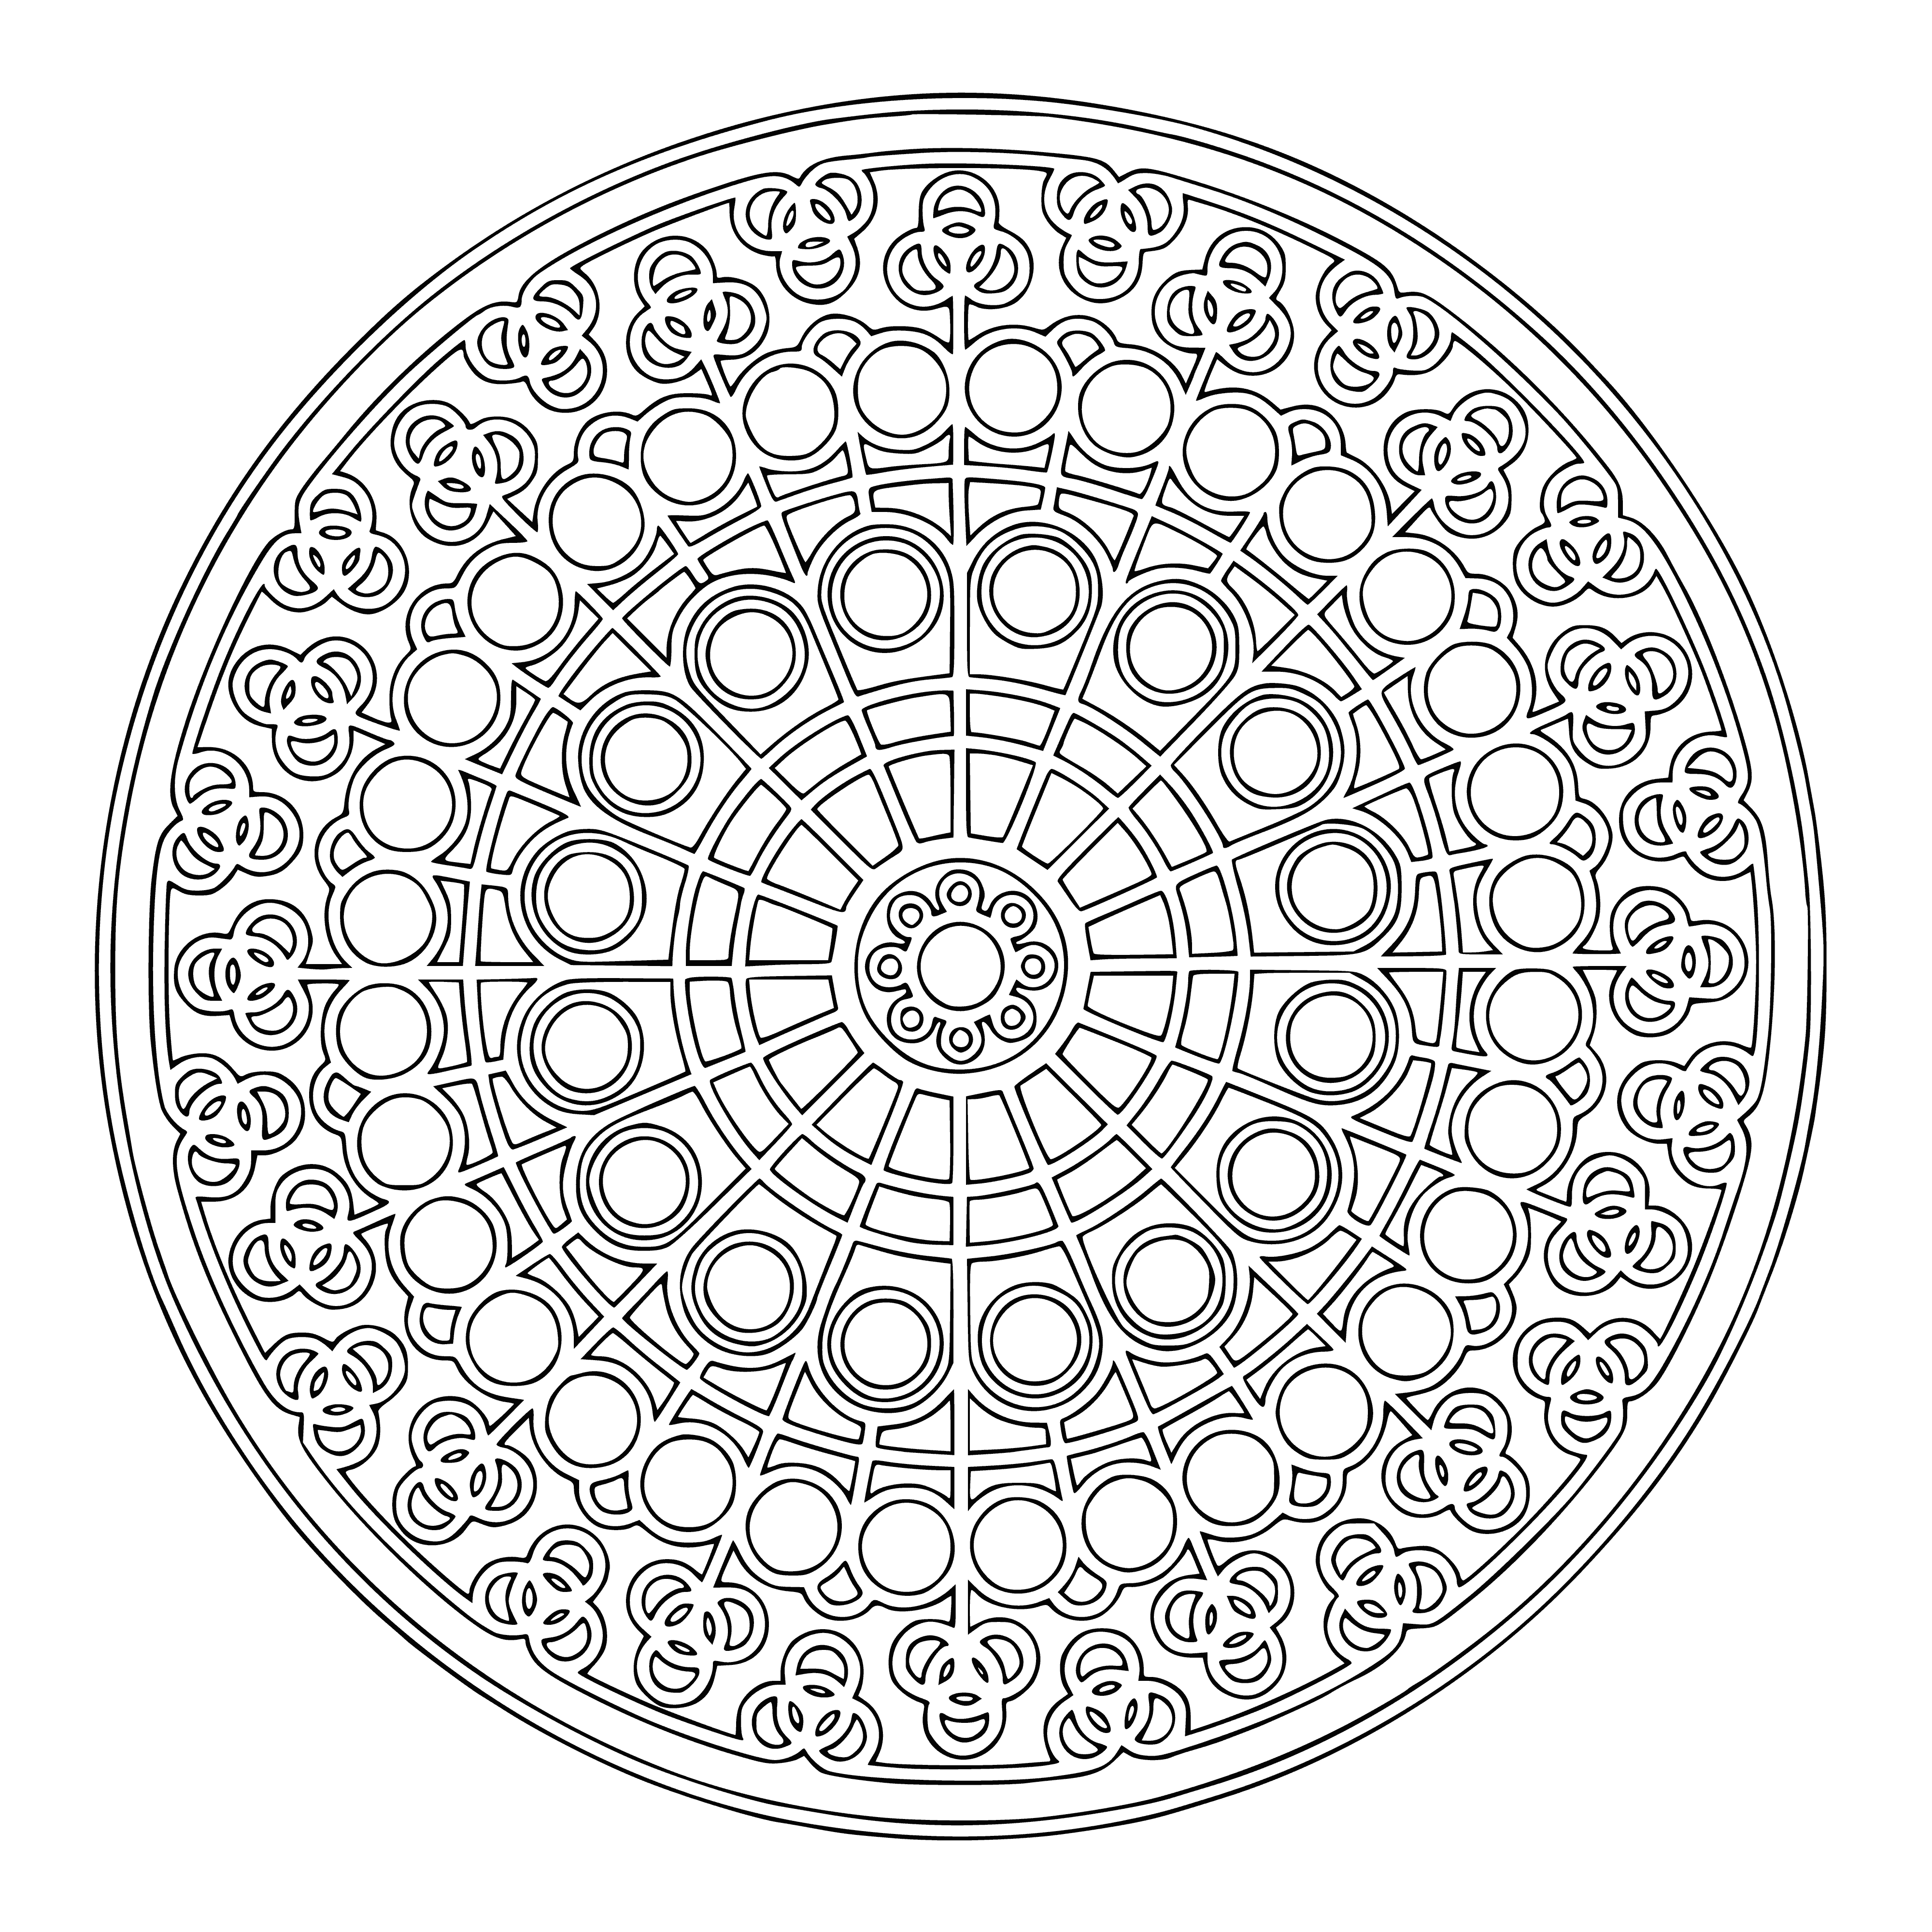 coloring page: Mandala symbolizes the universe in Buddhism & Hinduism. Has concentric circles w/ symbols & a lotus flower in center.